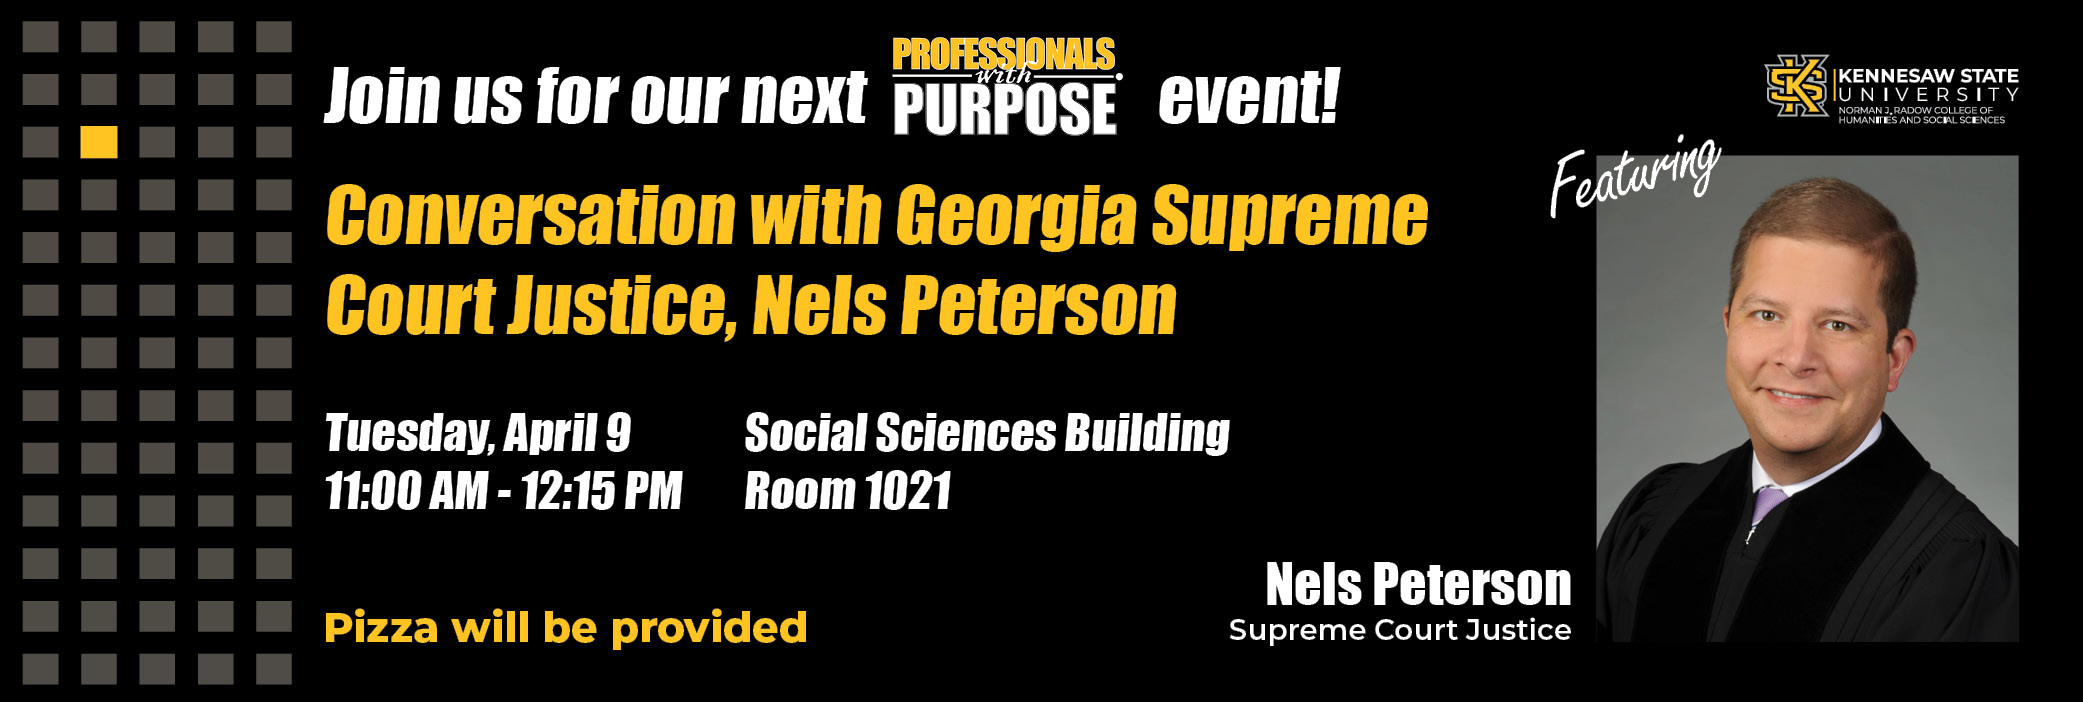 Professionals with Purpose Court Justice Nels Peterson